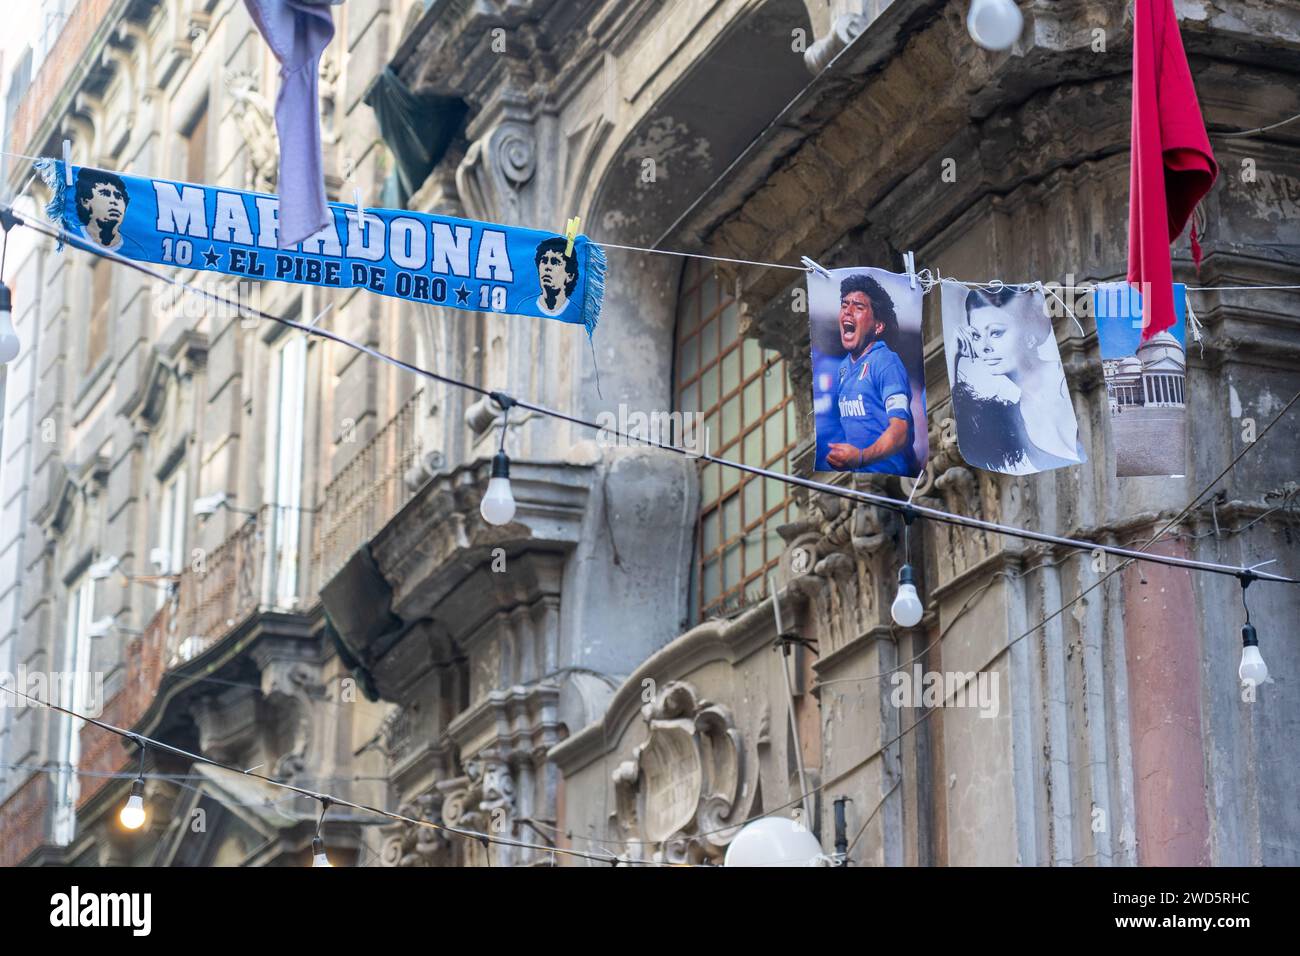 Diego Maradona and Sofia Loren scarf and poster displayed on a street in Naples-Italy. Stock Photo